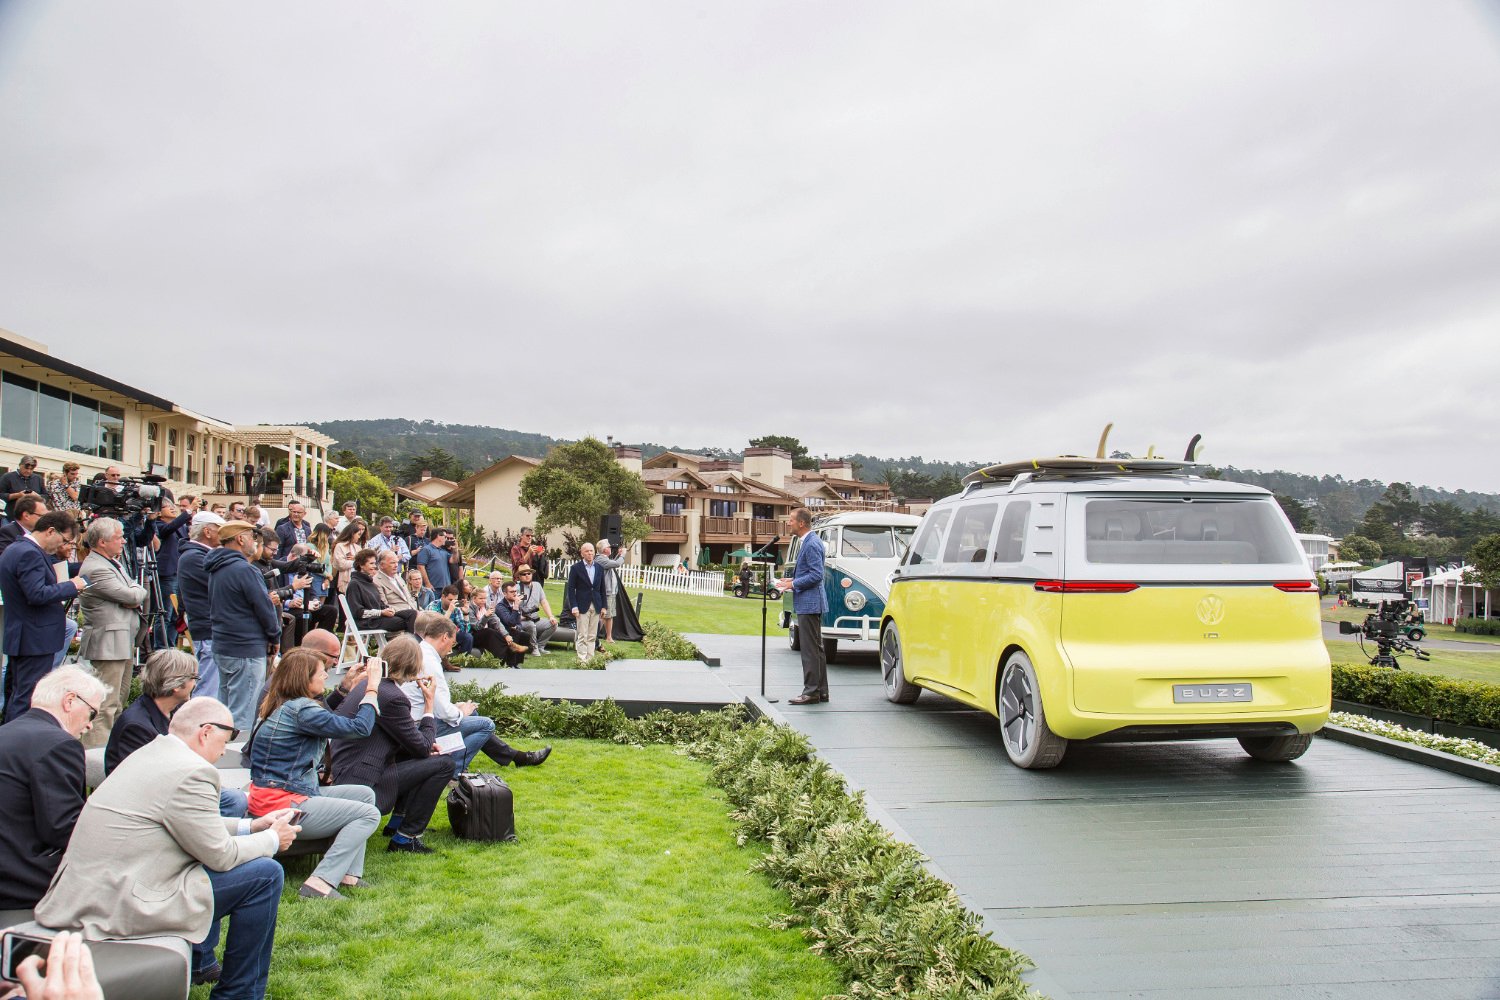 Volkswagen Press Conference At The Concours D'elegance In Pebble